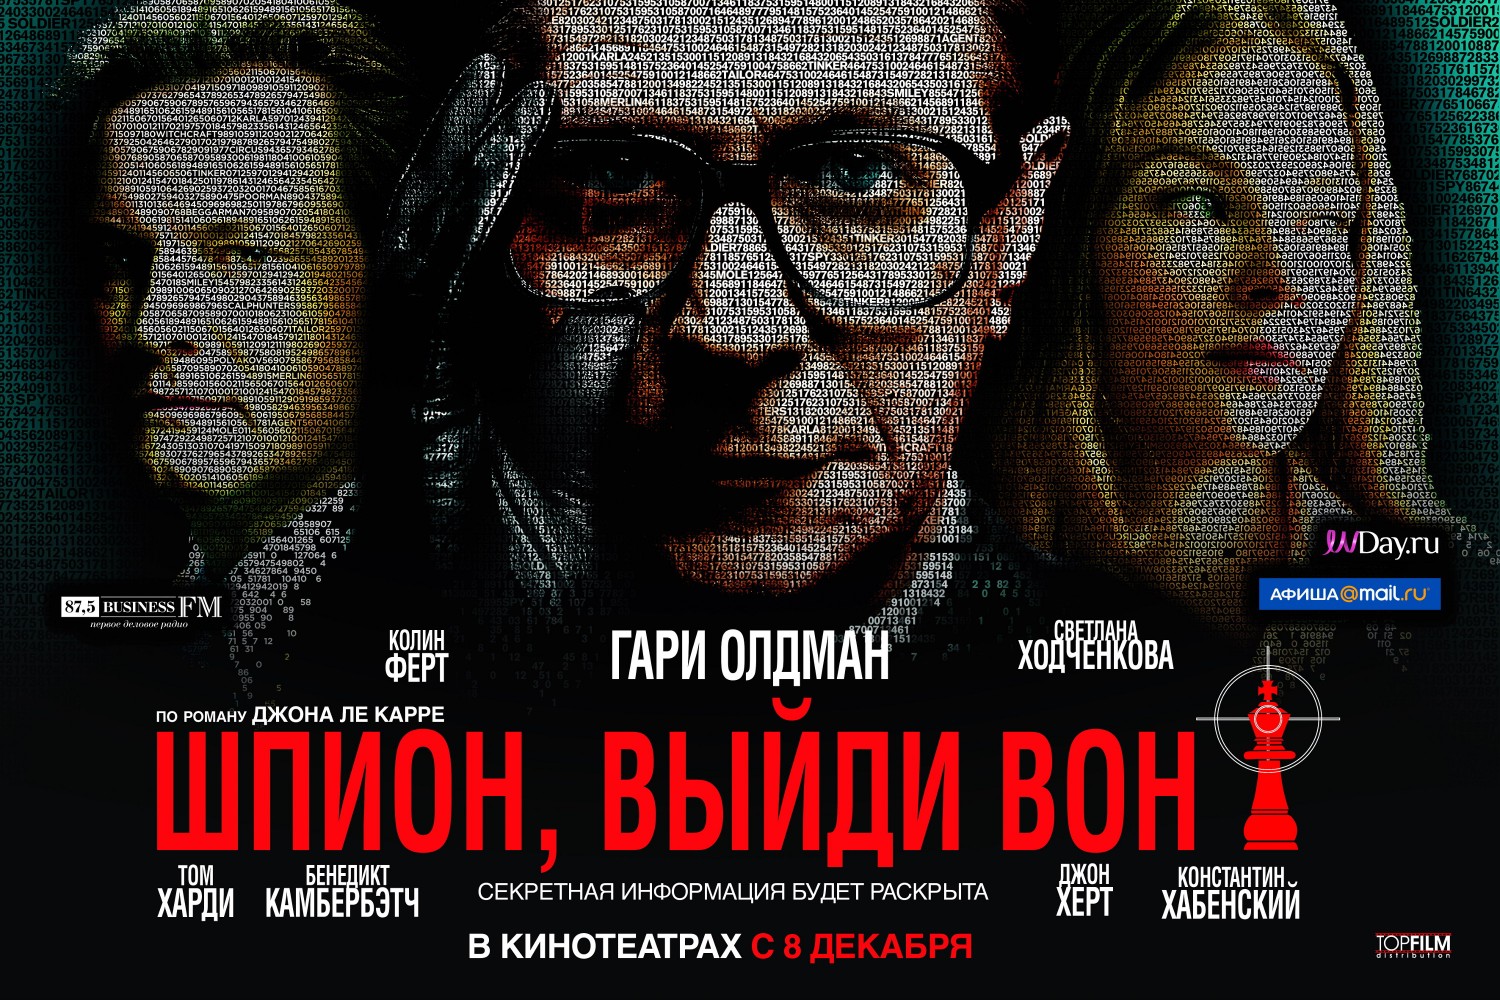 Extra Large Movie Poster Image for Tinker, Tailor, Soldier, Spy (#10 of 12)